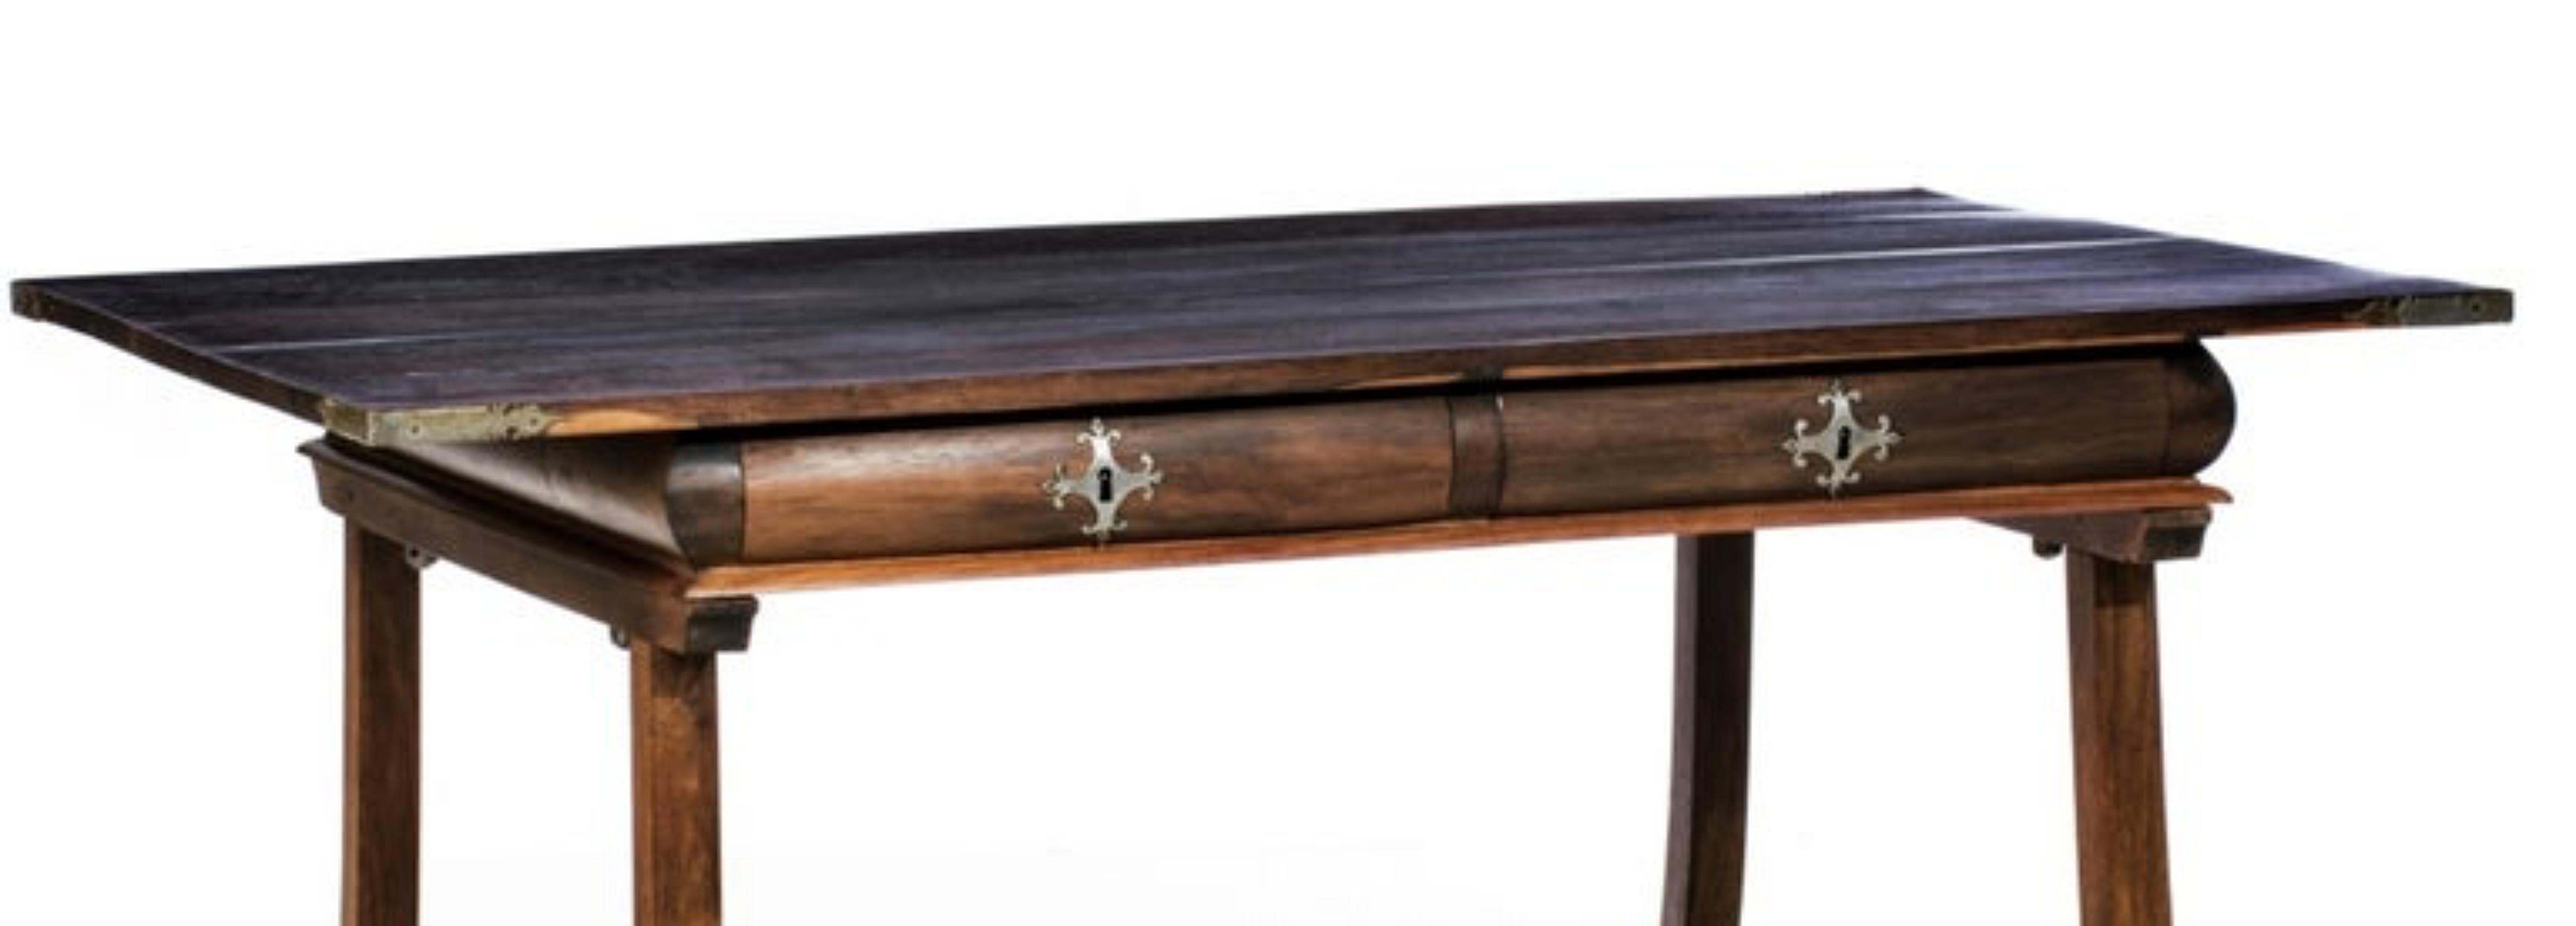 Hand-Crafted Important Filipine Table of the 17th Century For Sale